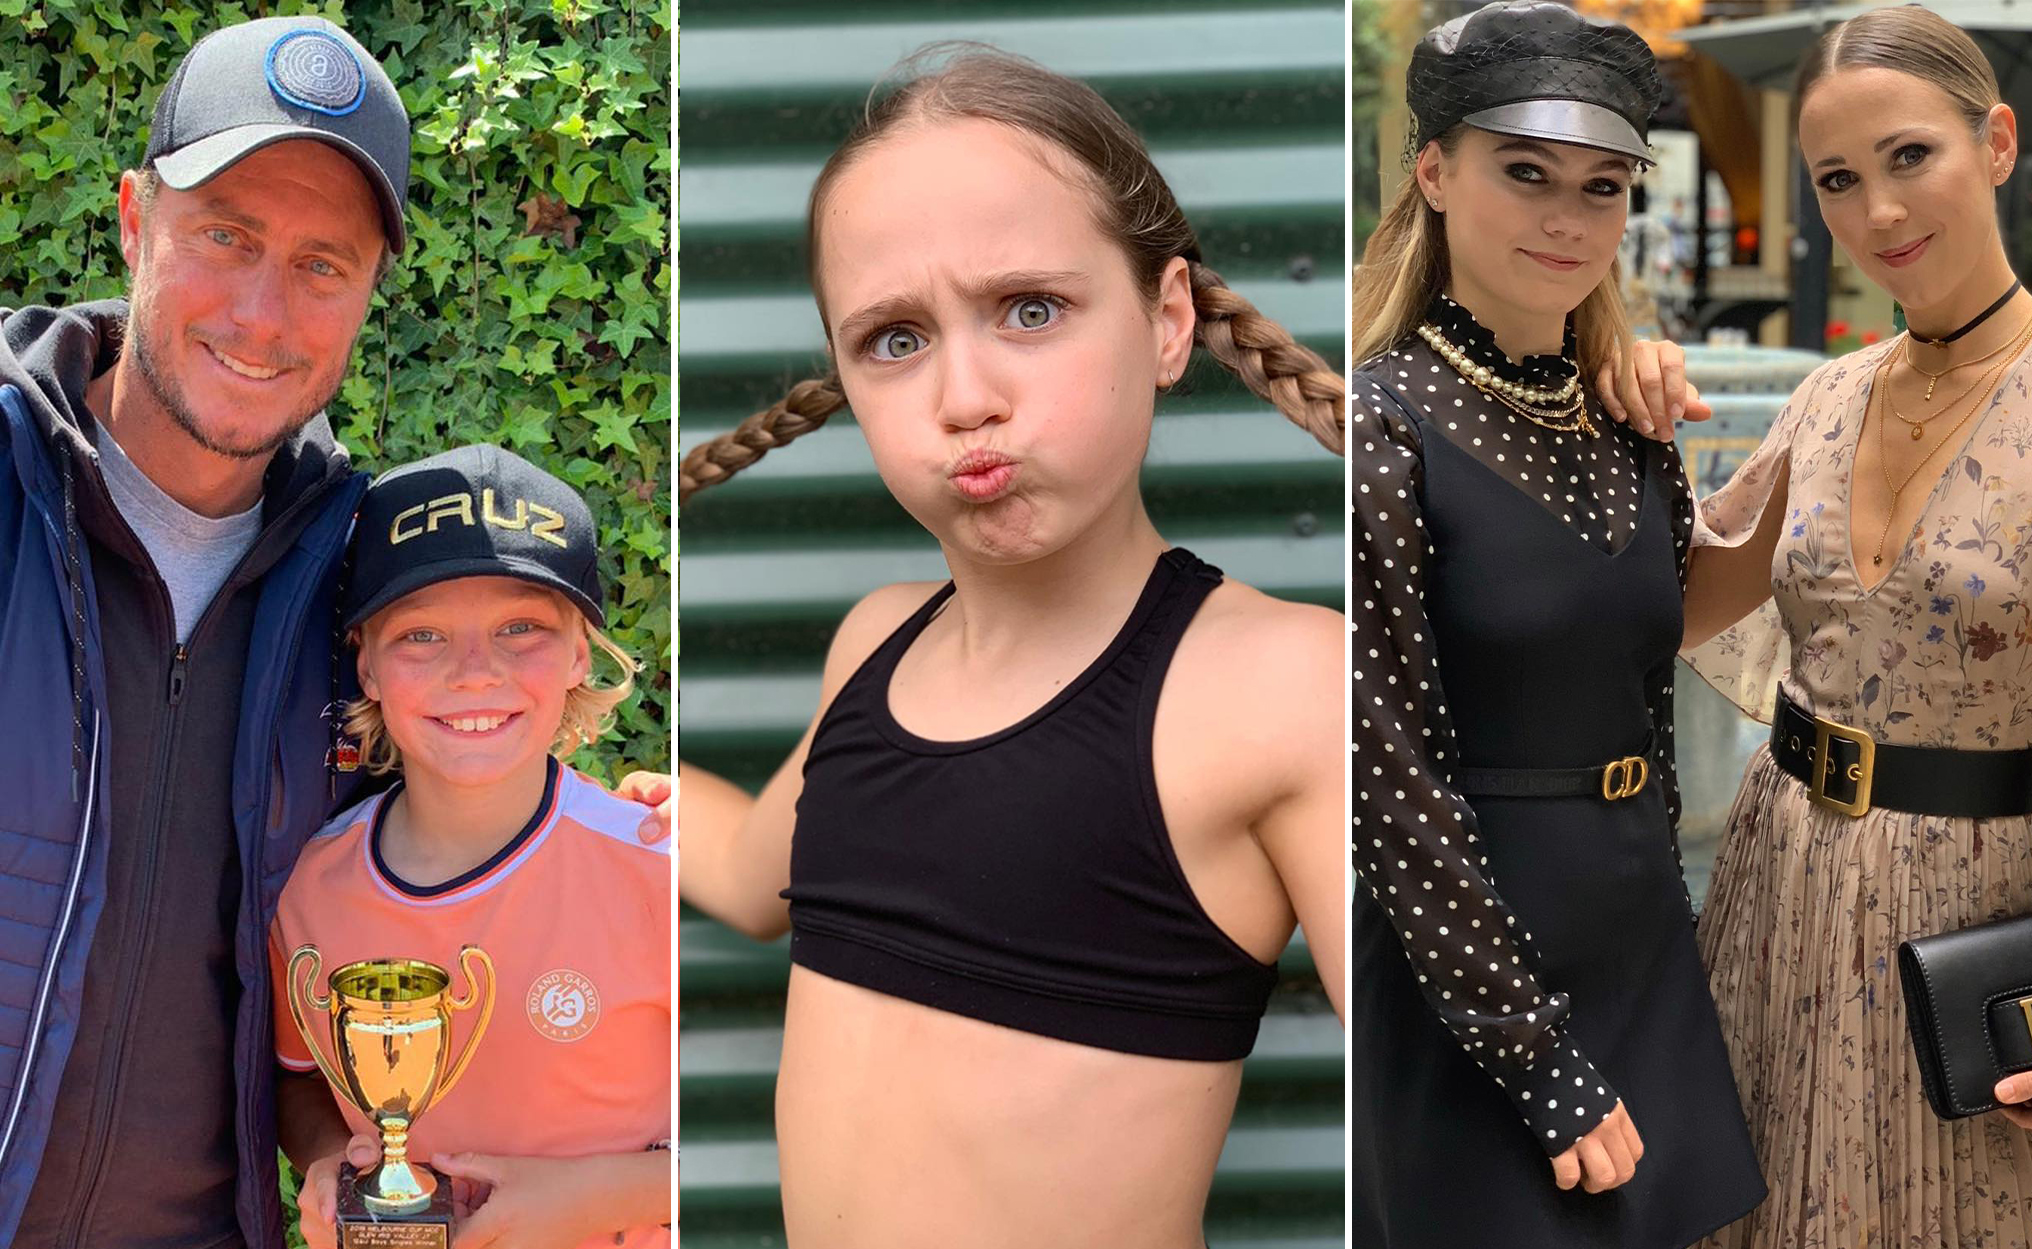 Bec and Lleyton Hewitt’s three kids are their mini-mes! See the best pics of Mia, Ava and Cruz